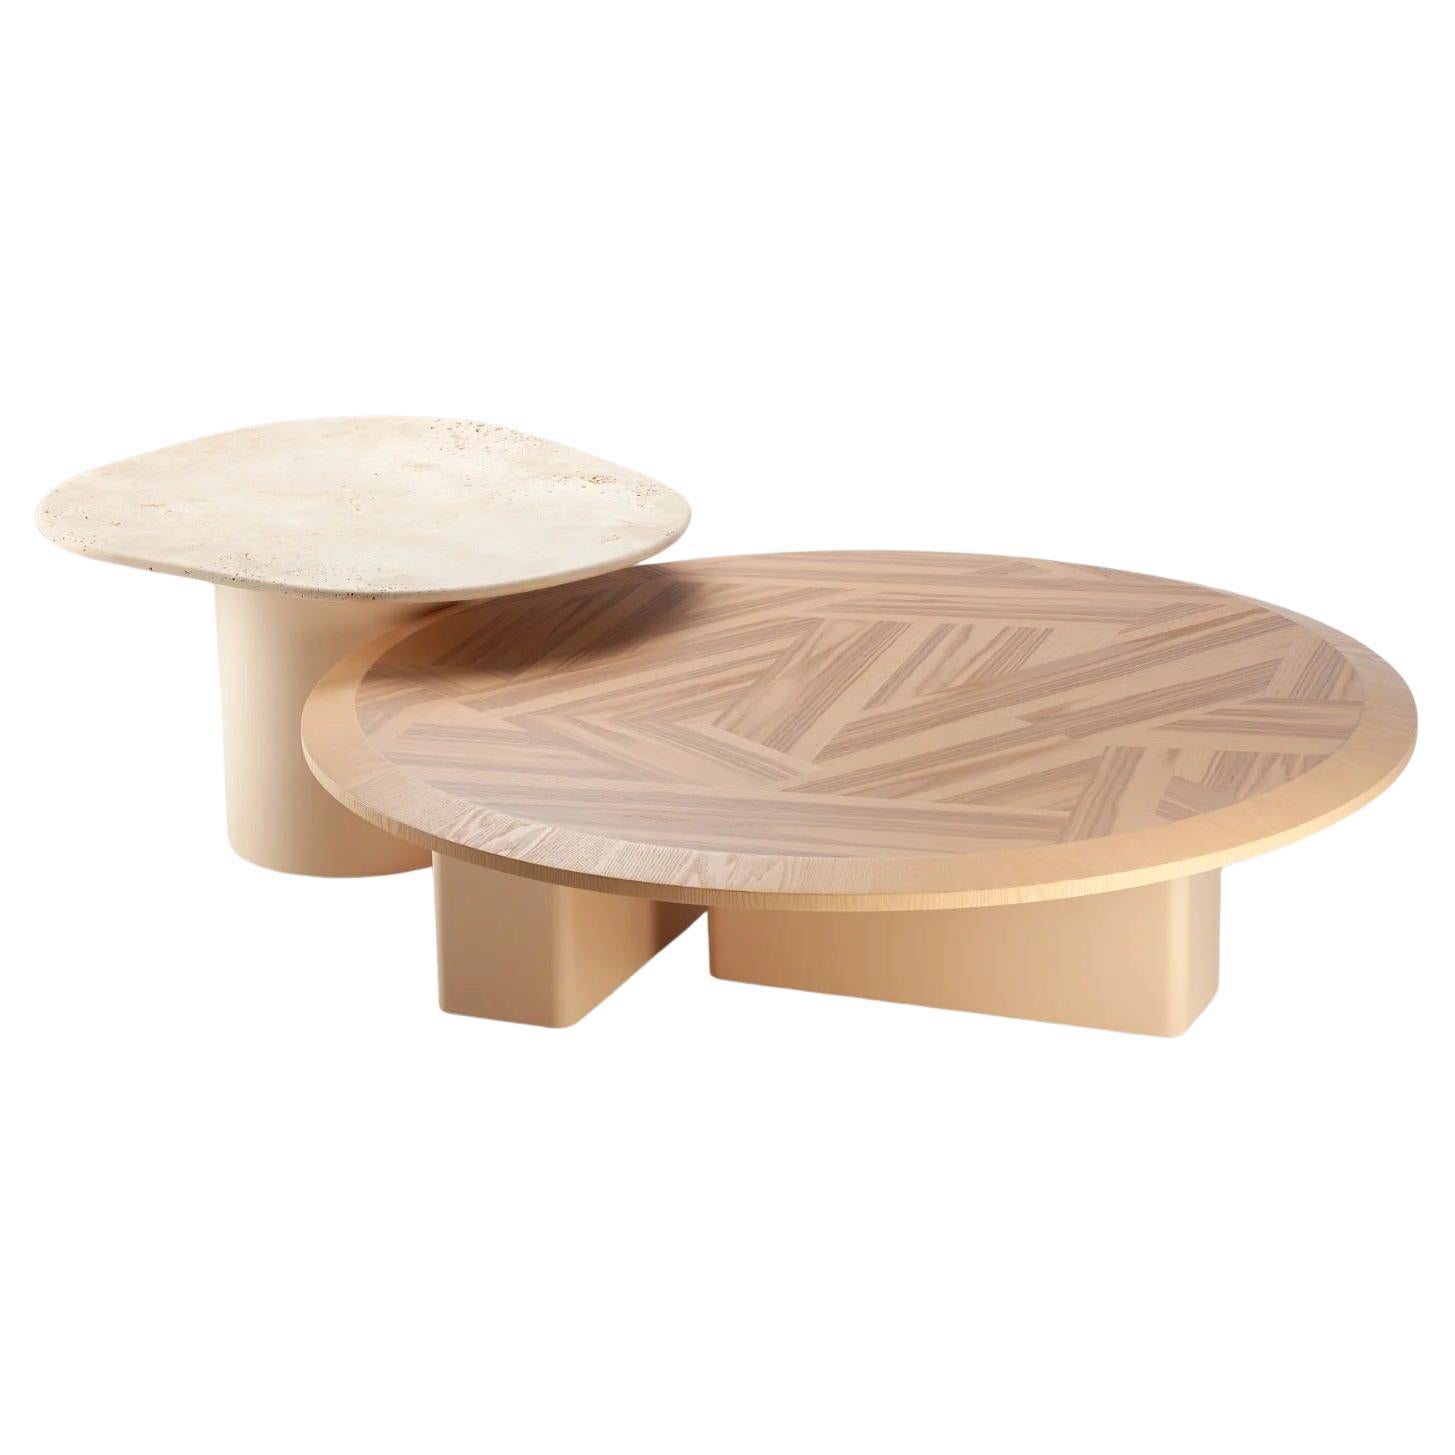 DOOQ Scandinavian Modern Travertine and Olive Ash Wood Tables L'anamour, Rose